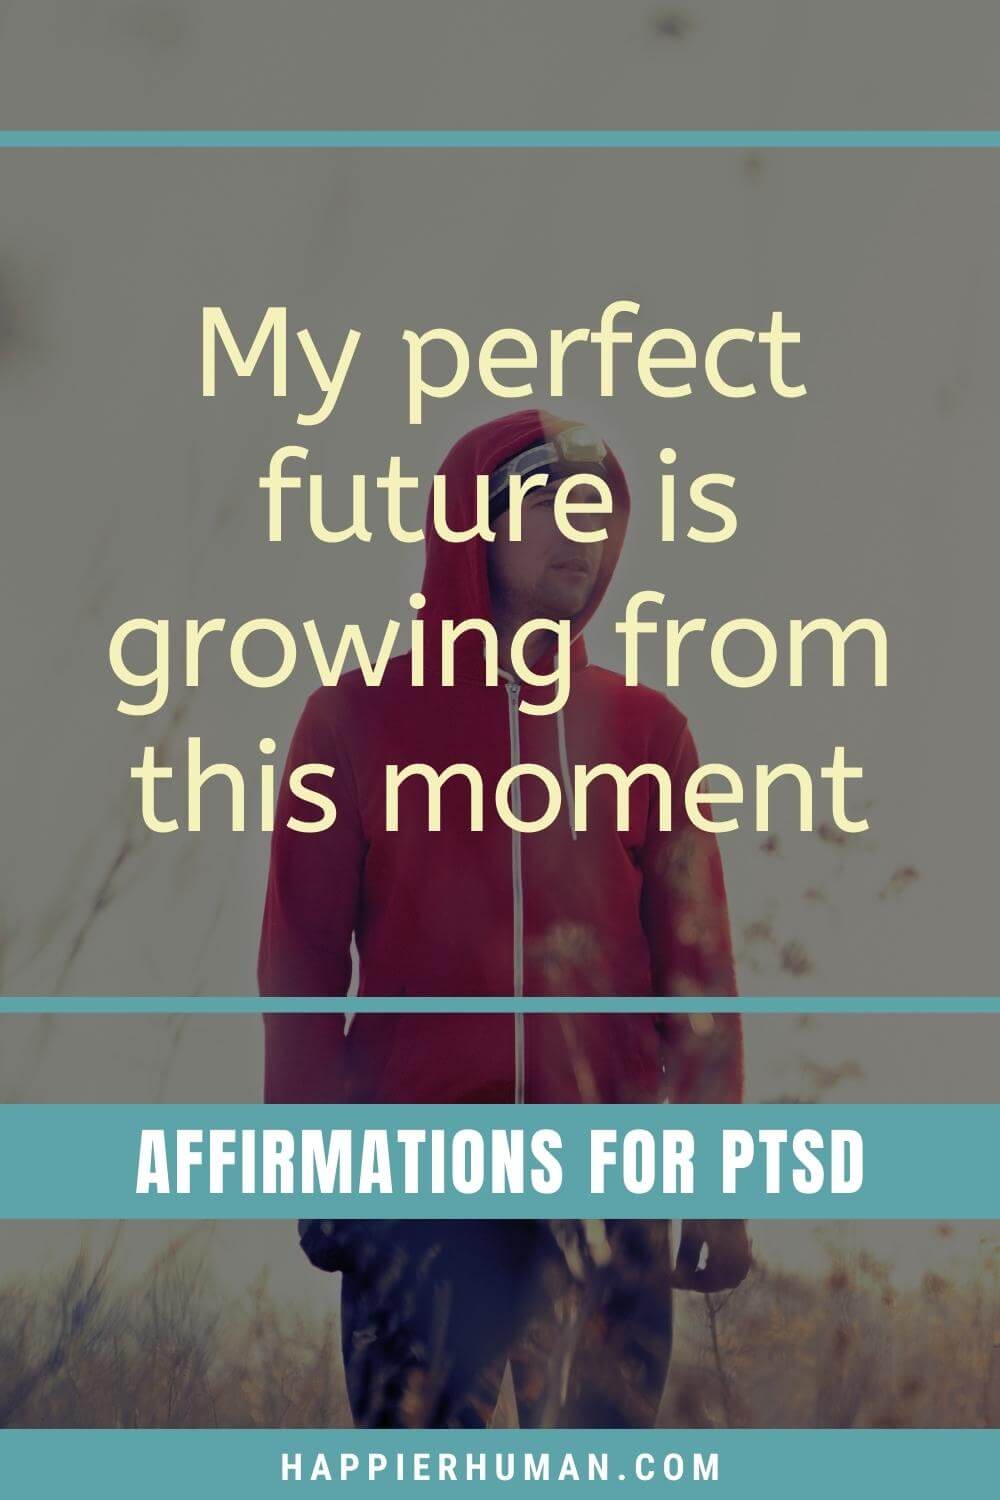 Affirmations For PTSD - My perfect future is growing from this moment | affirmations for childhood trauma | trauma survivor mantra | affirmations for betrayal trauma